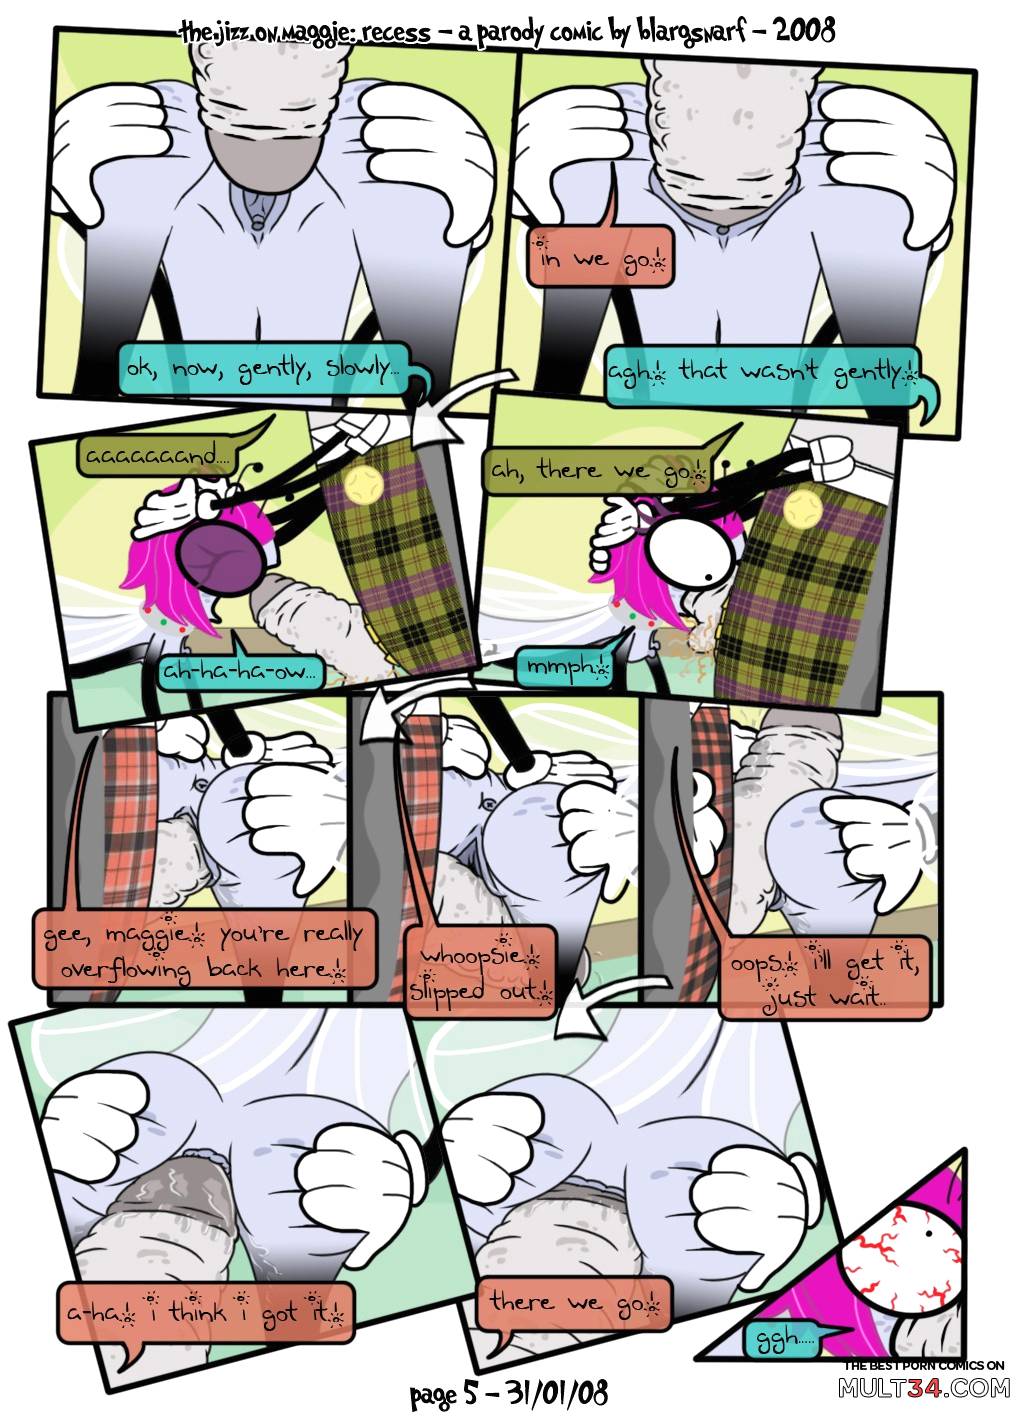 The Jizz on Maggie: Recess page 5